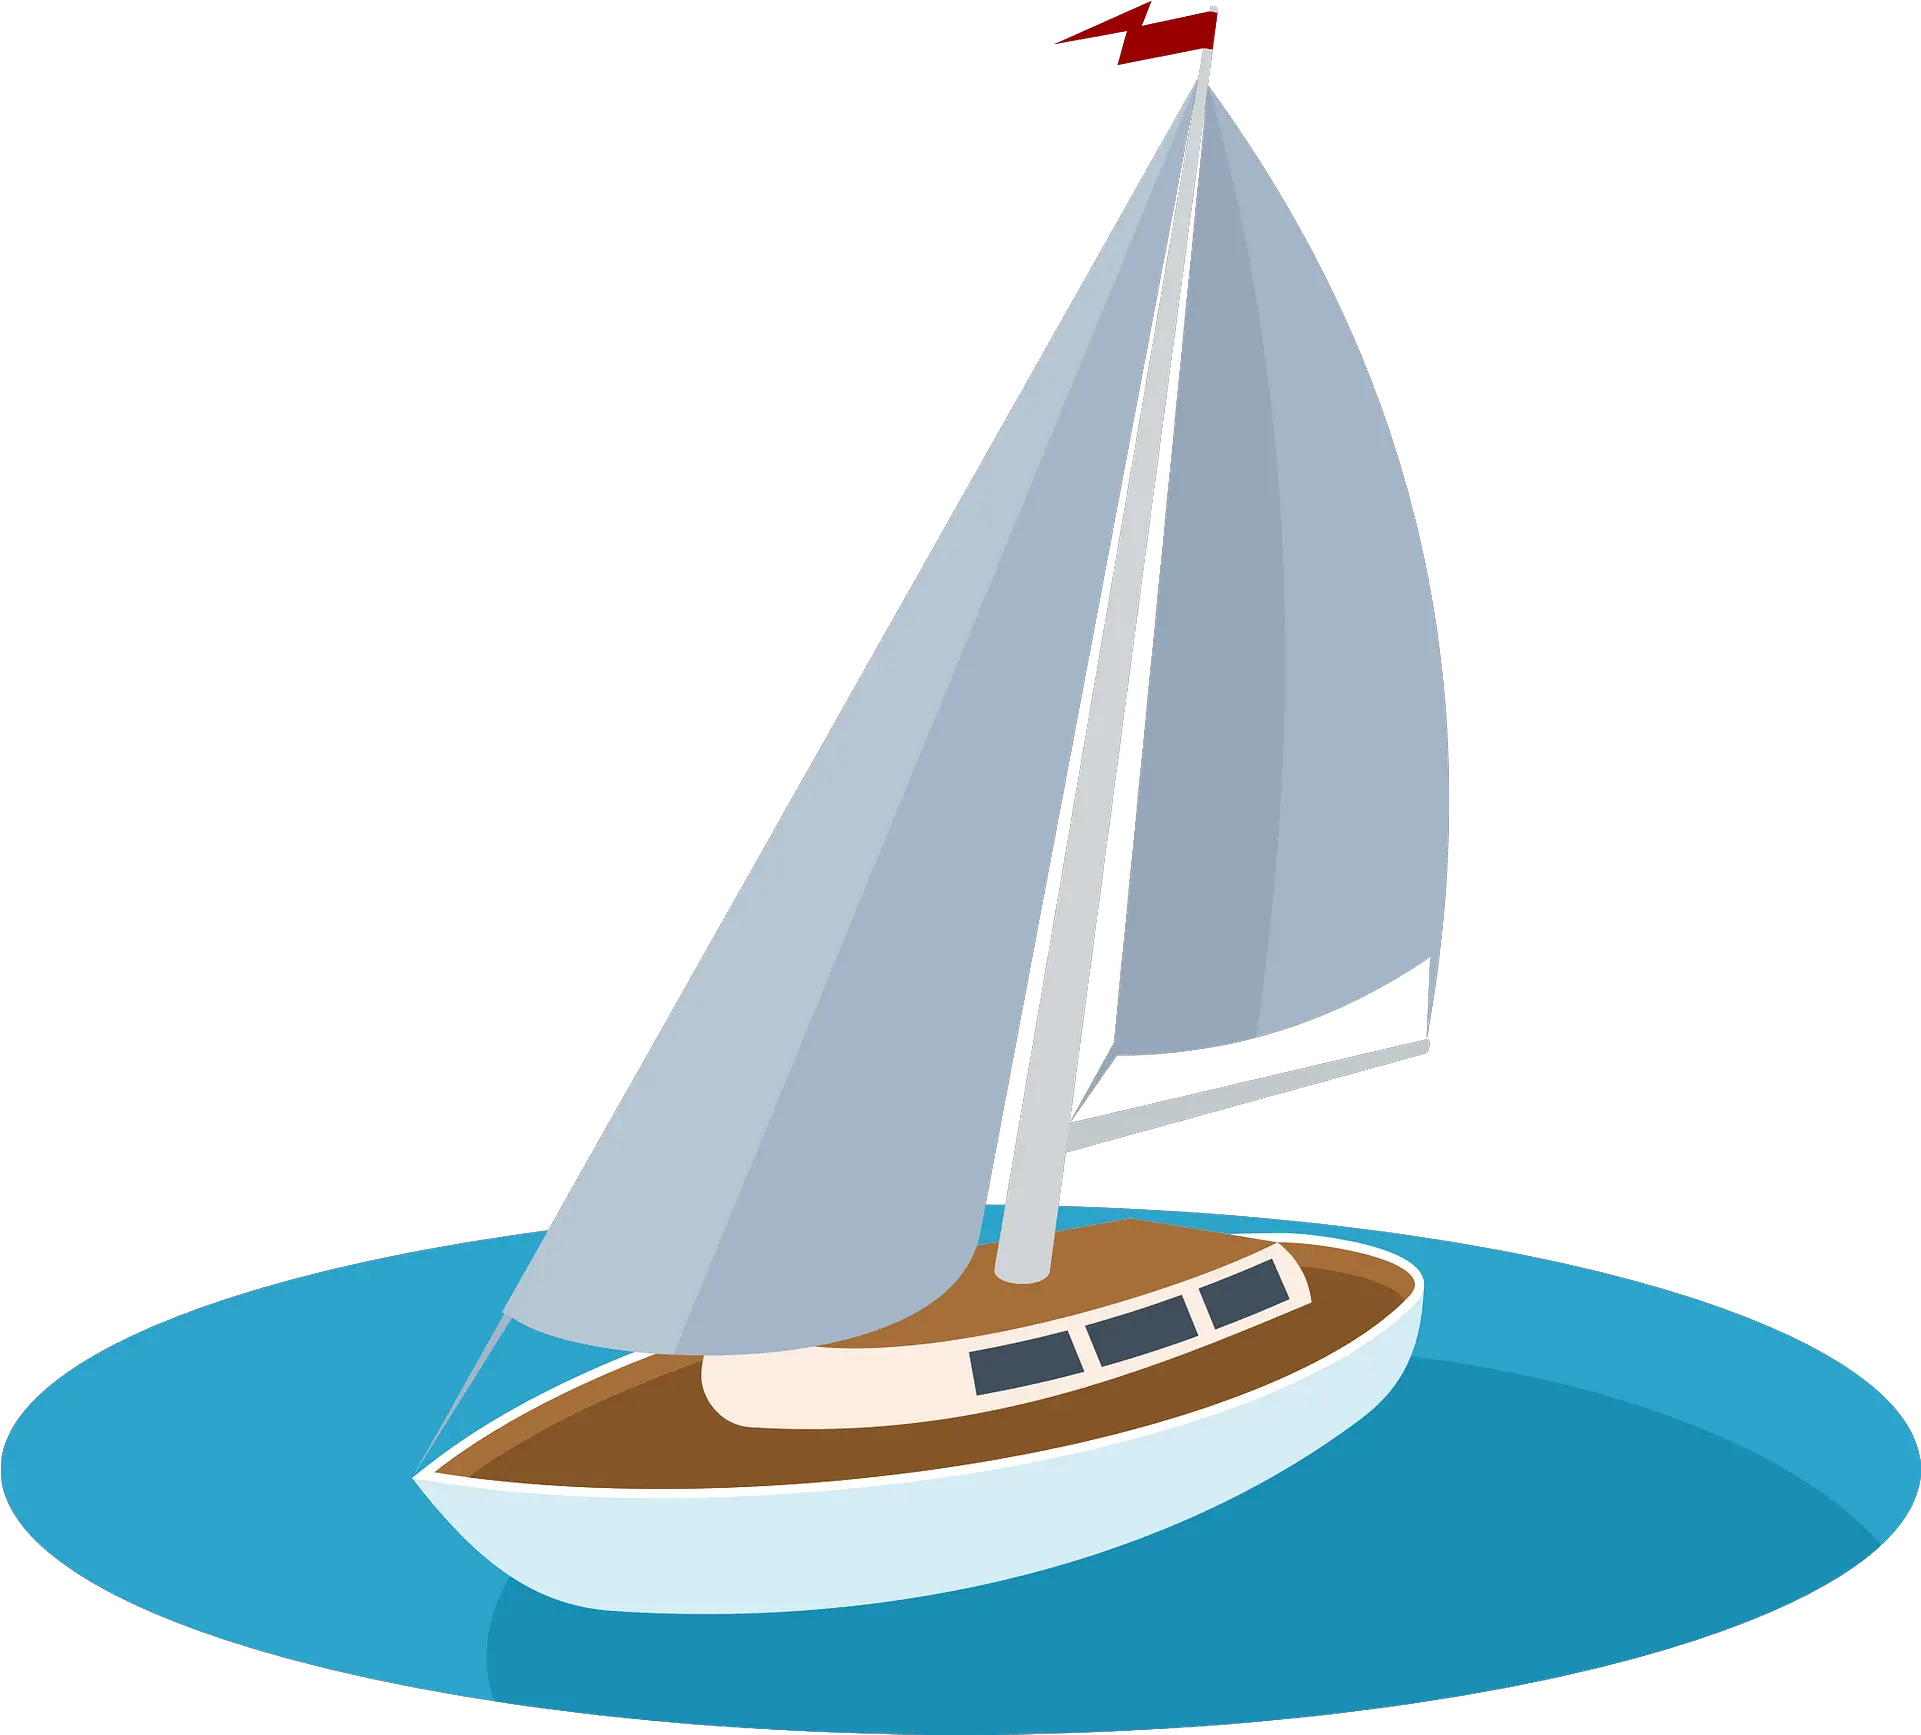 Sailing Yacht Clipart Free Download Transparent Png Yacht Clipart Yacht Png